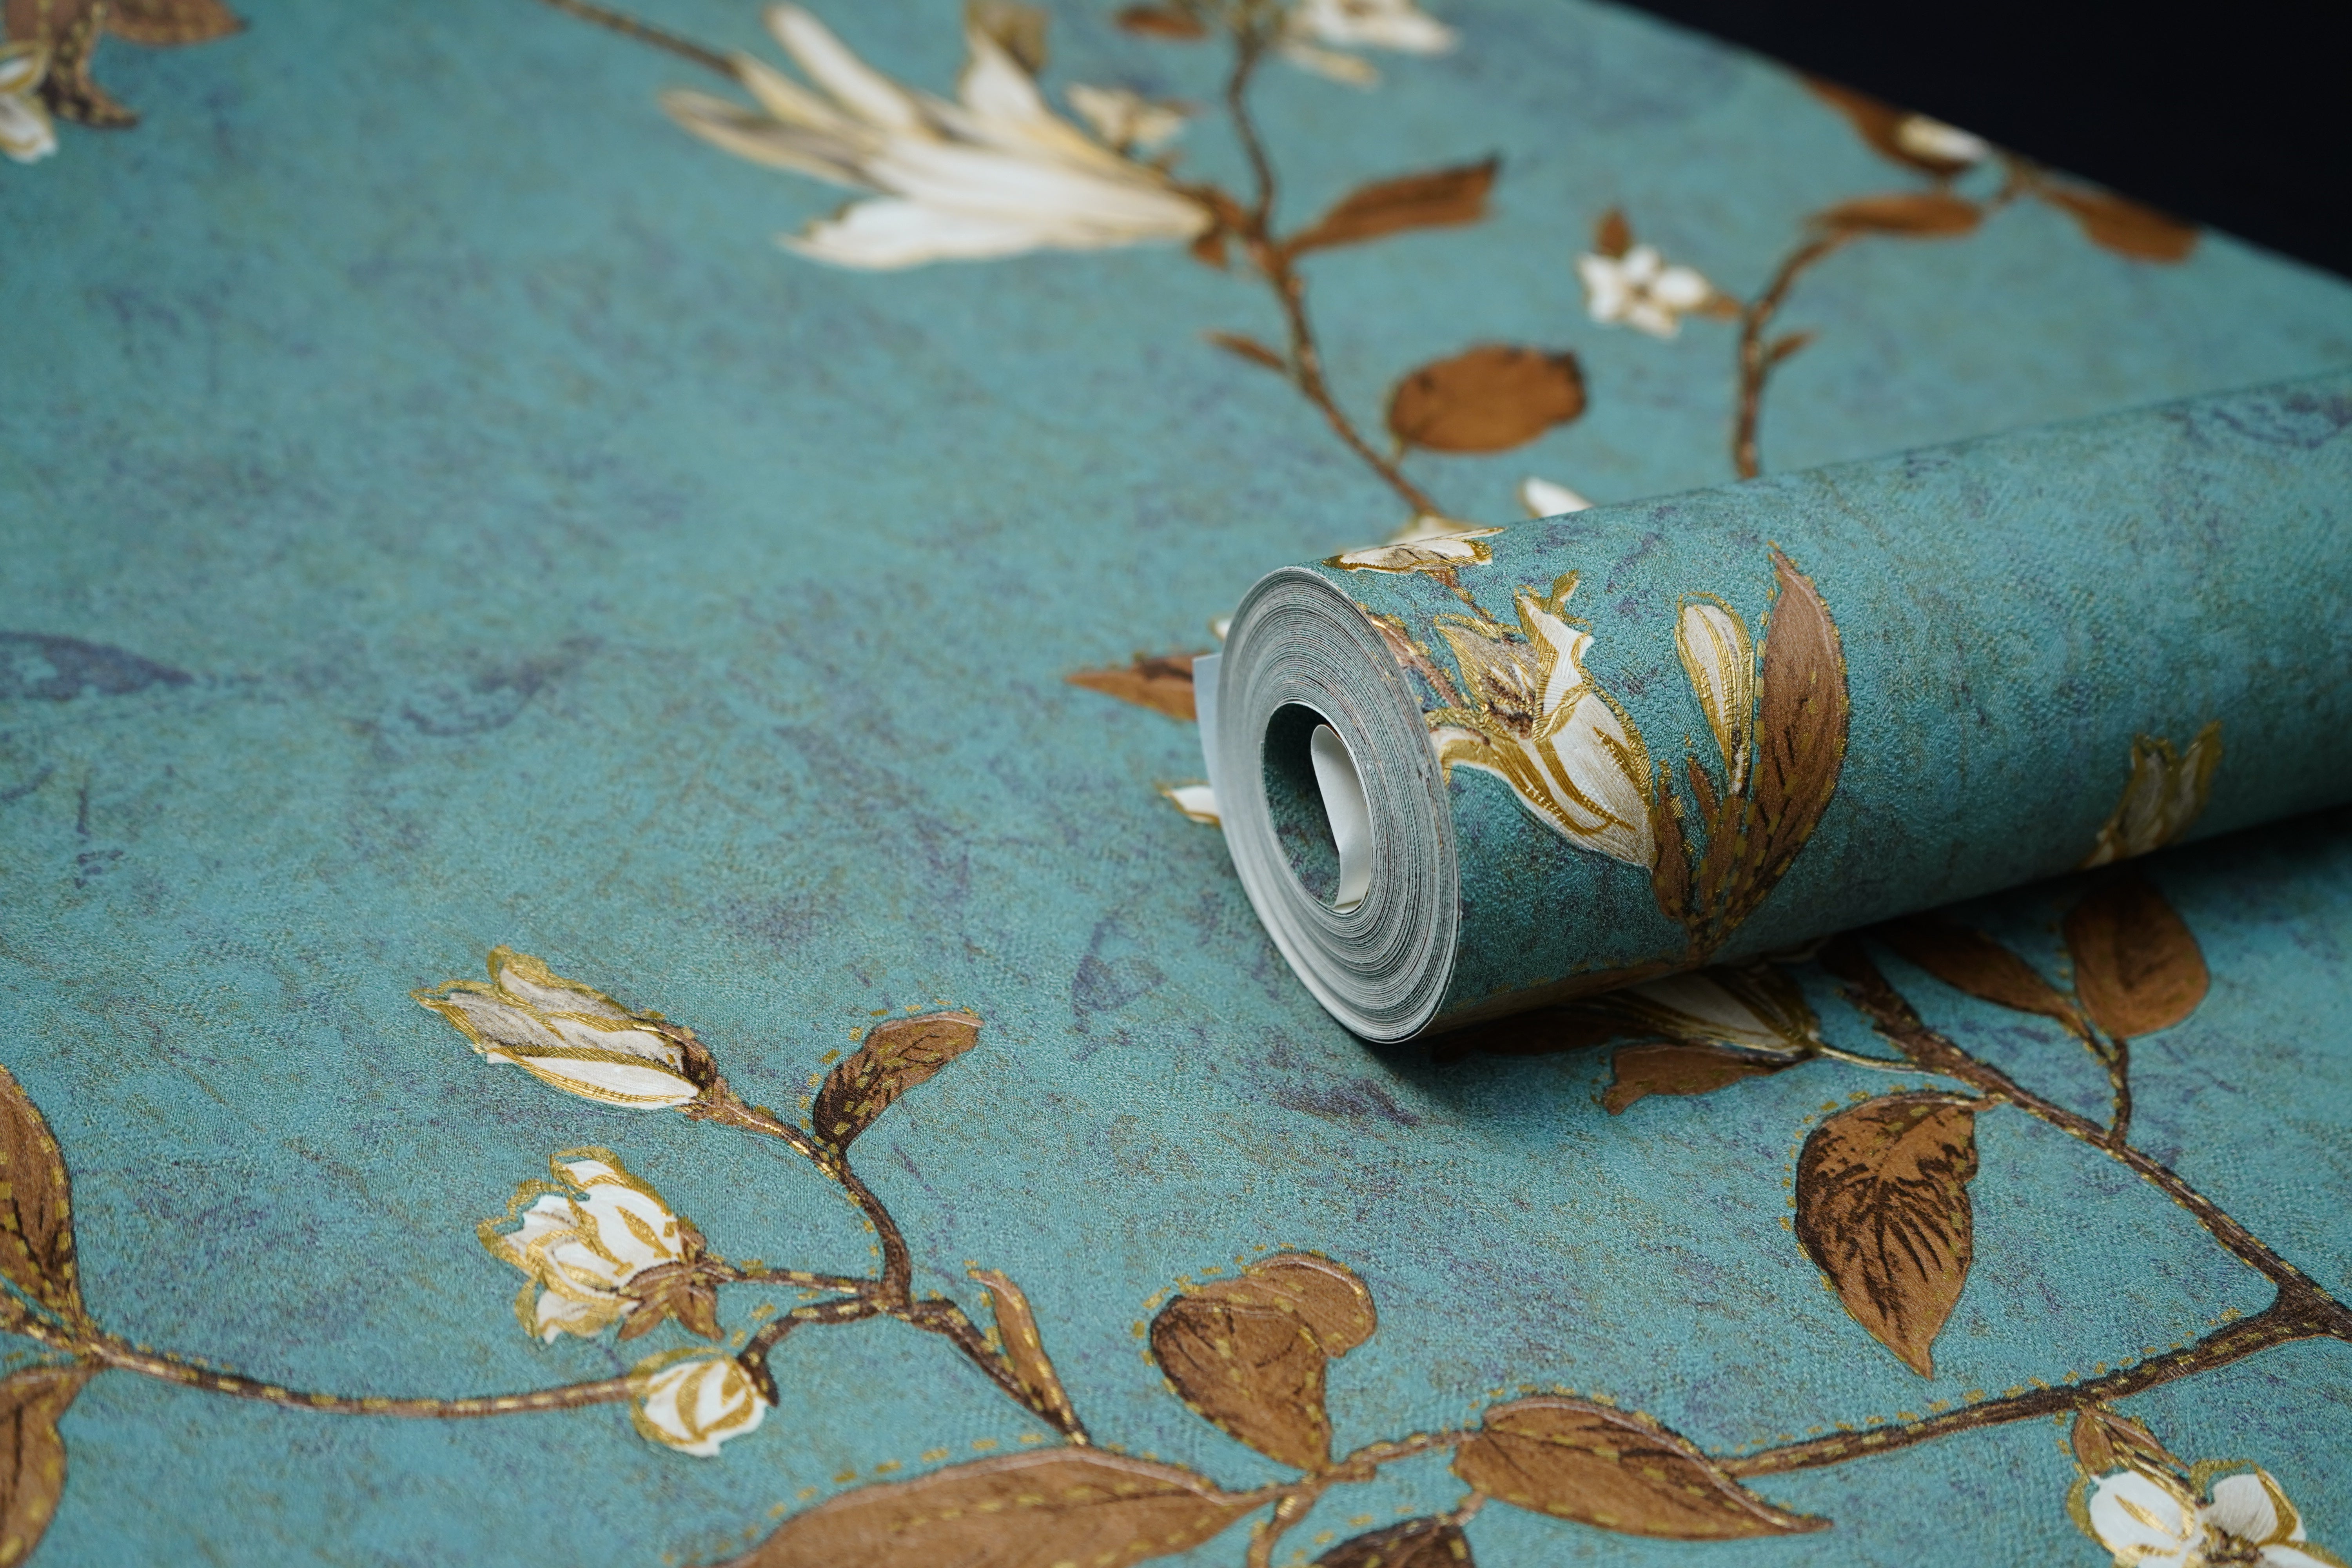 Turquoise Blue with Brown Leaves Design Wallpaper Damask Design Not Self Adhesive 53 Cm X 1000 Cm for PVC Vinyl Coated for  Wall Bedroom Living Room Latest Stylish for Home Decoration (Turquoise with Brown Leaves, 57 Sqft Roll) (NW-09)